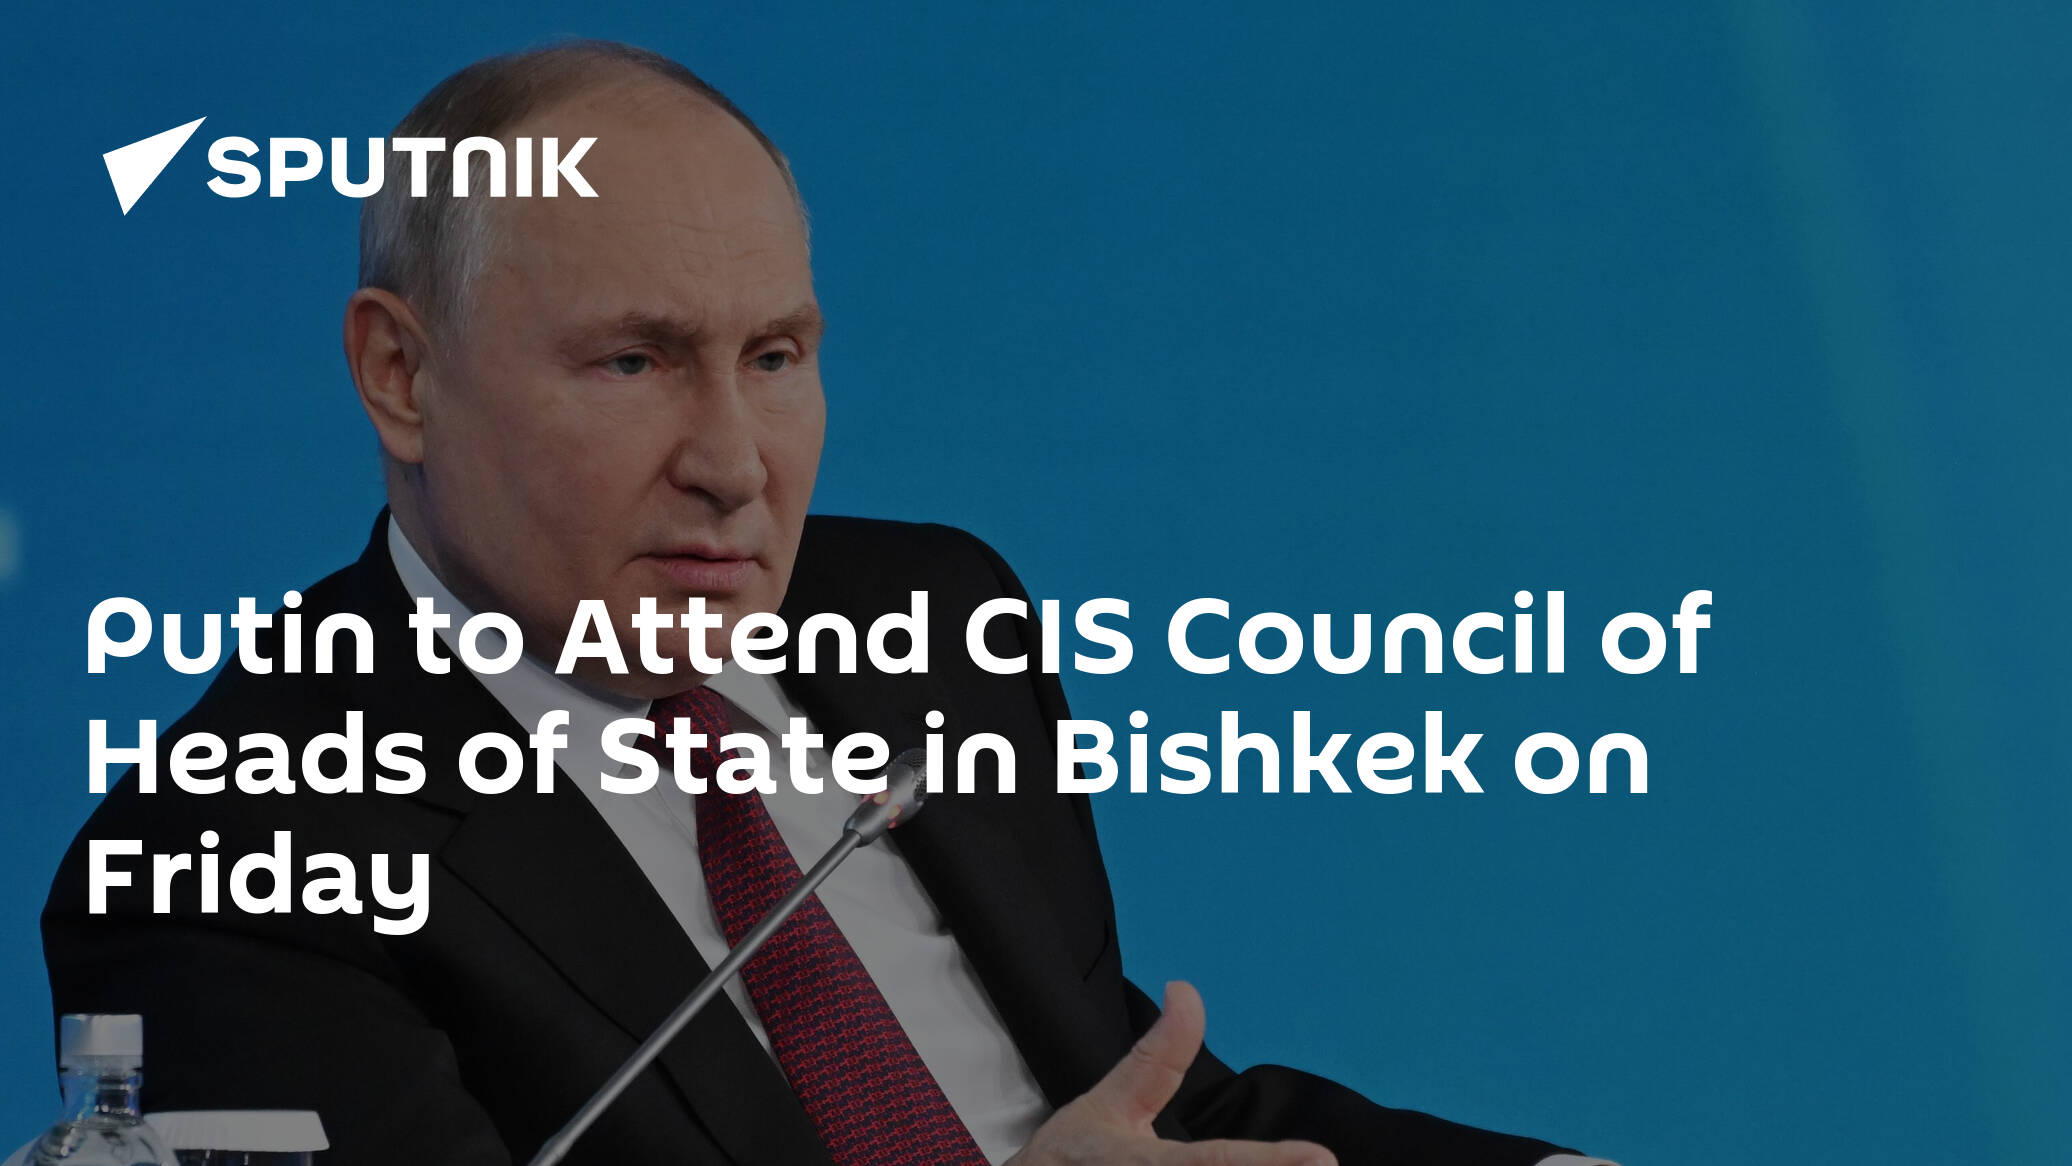 Putin to Attend CIS Council of Heads of State in Bishkek on Friday